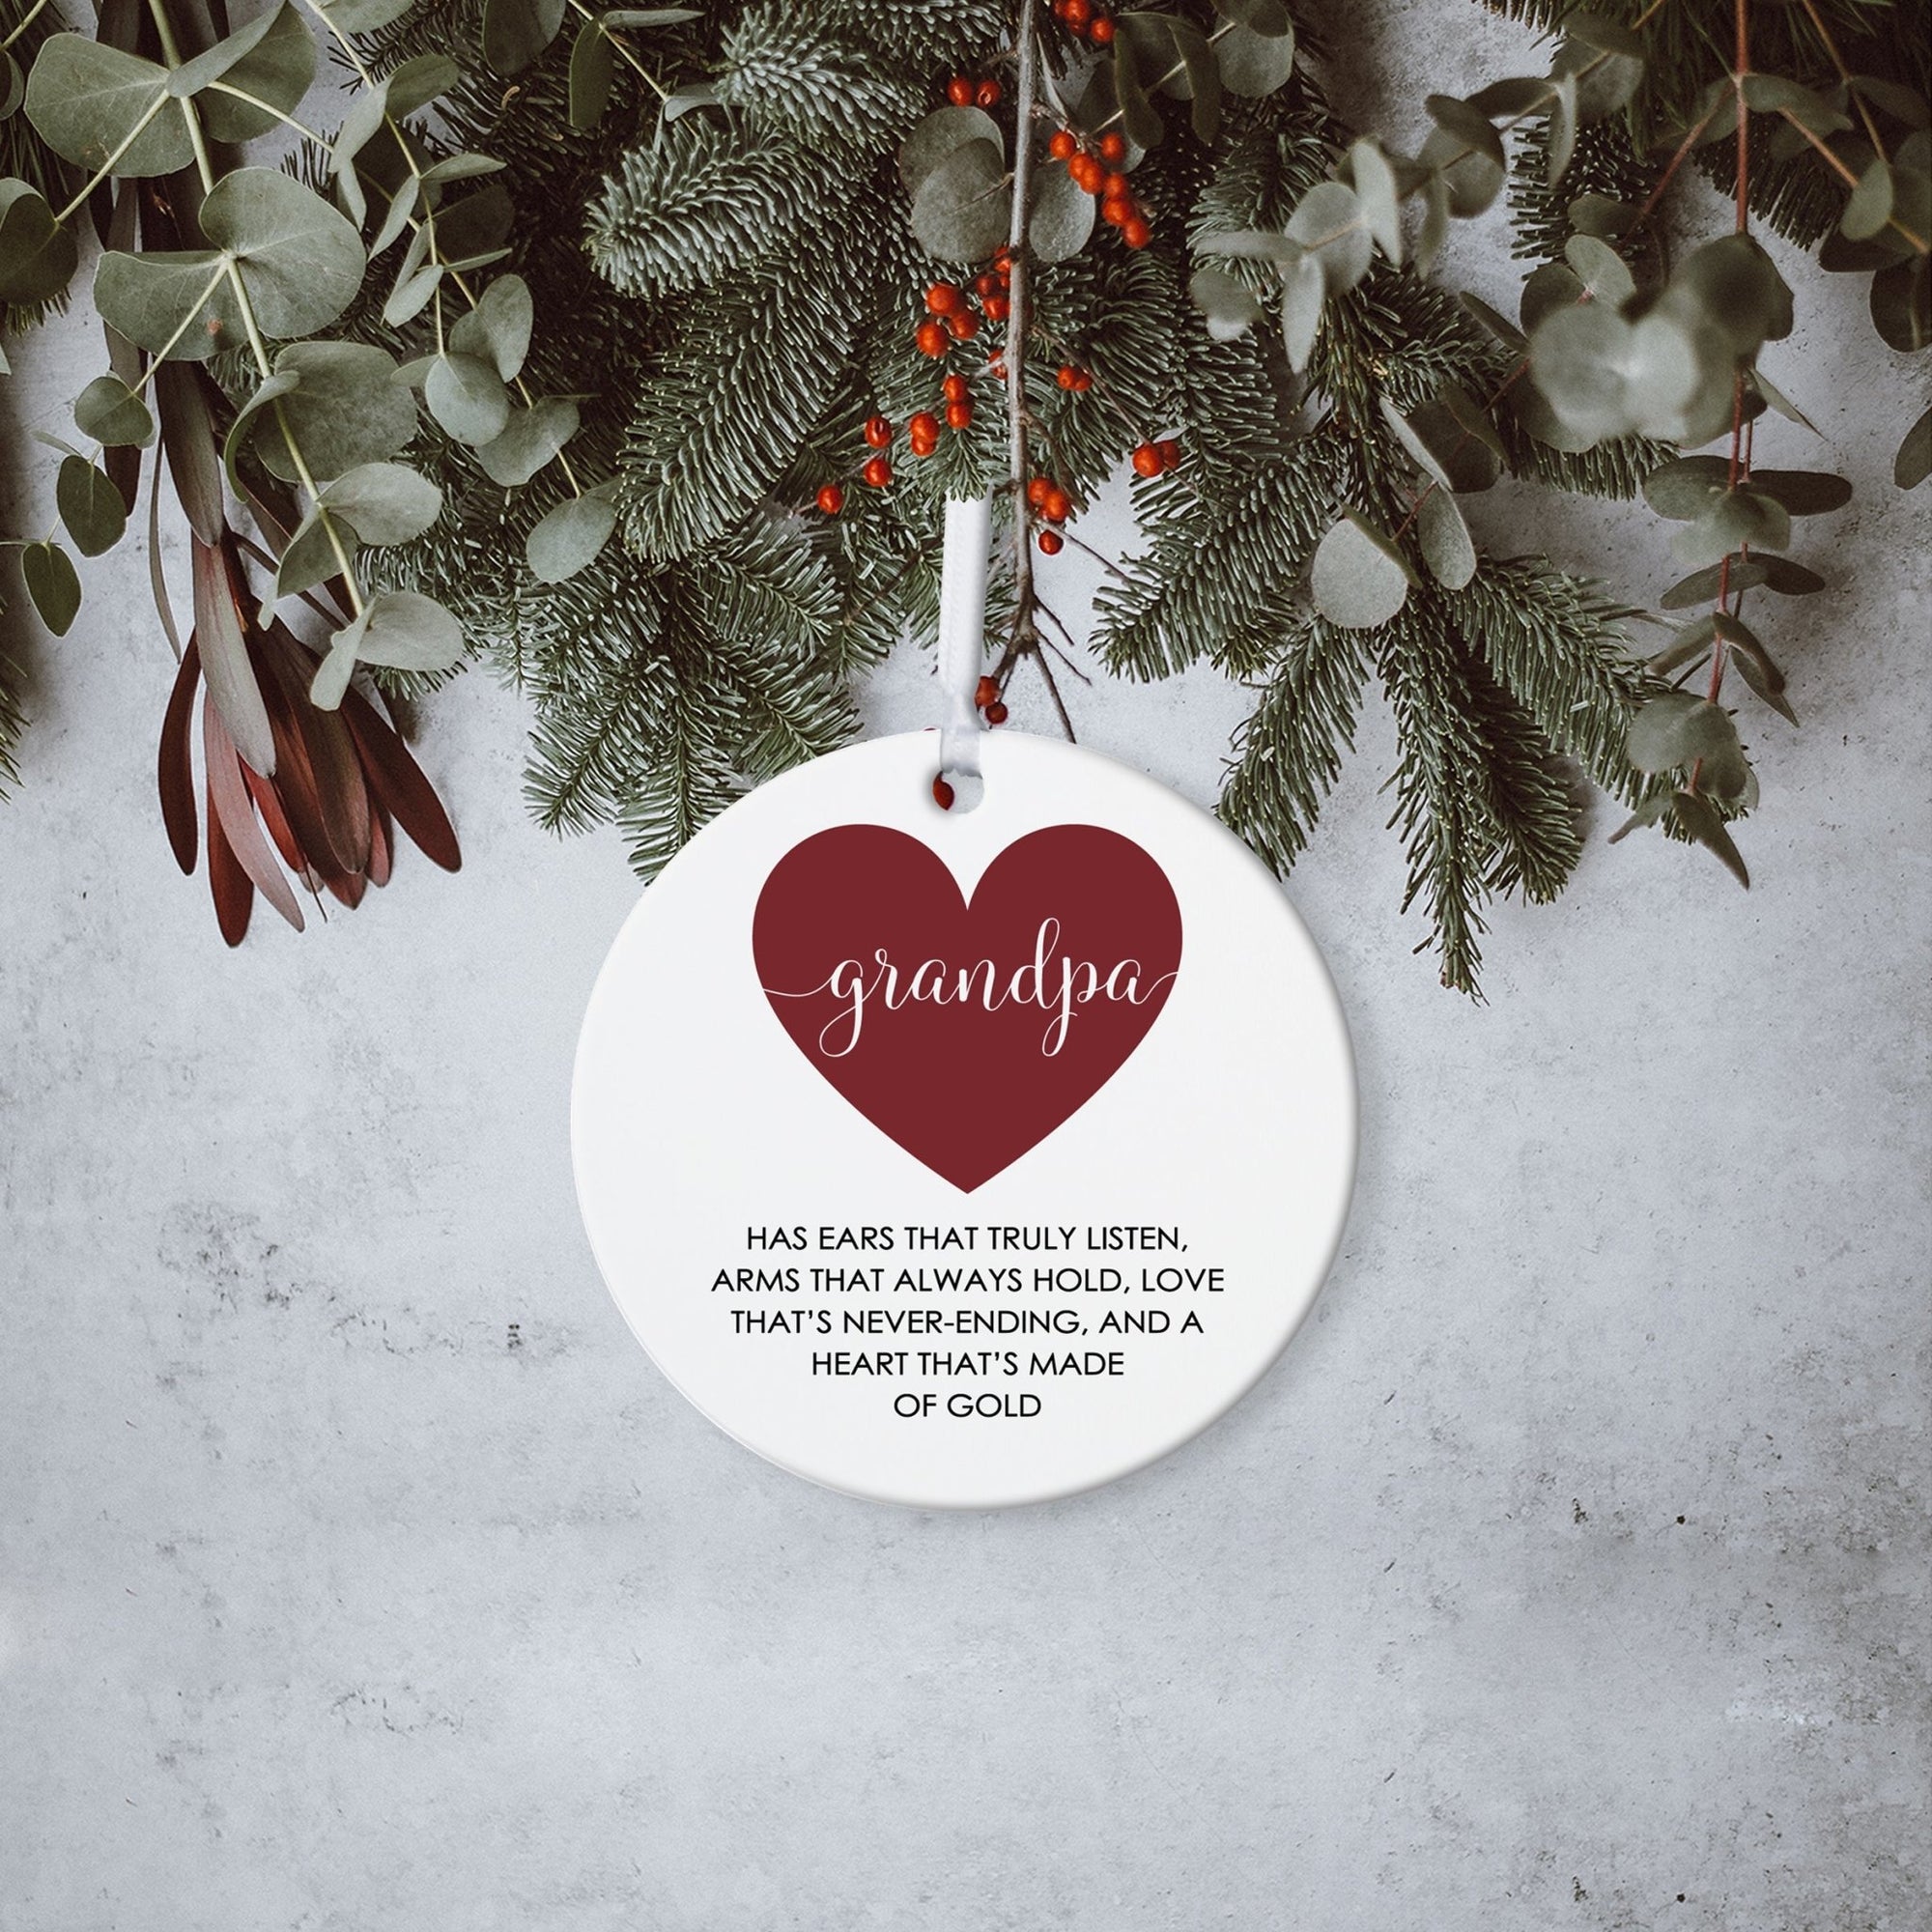 Grandparents White Ornament With Inspirational Message Gift Ideas - Grandpa Has Ears That Truly Listen (Heart) - LifeSong Milestones